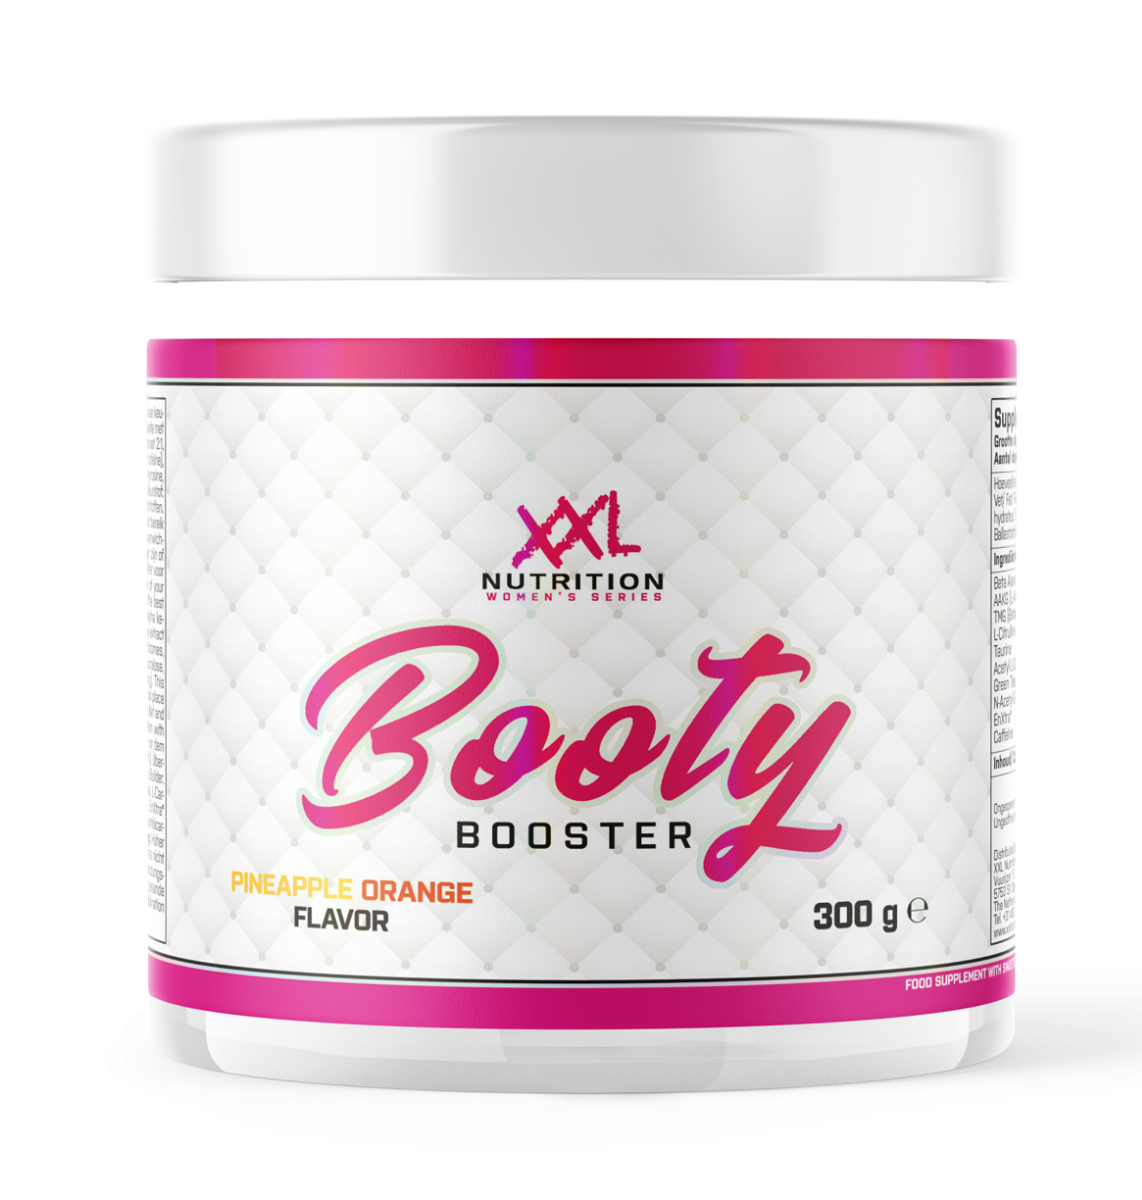 XXL Nutrition Booty Booster Pre-Workout